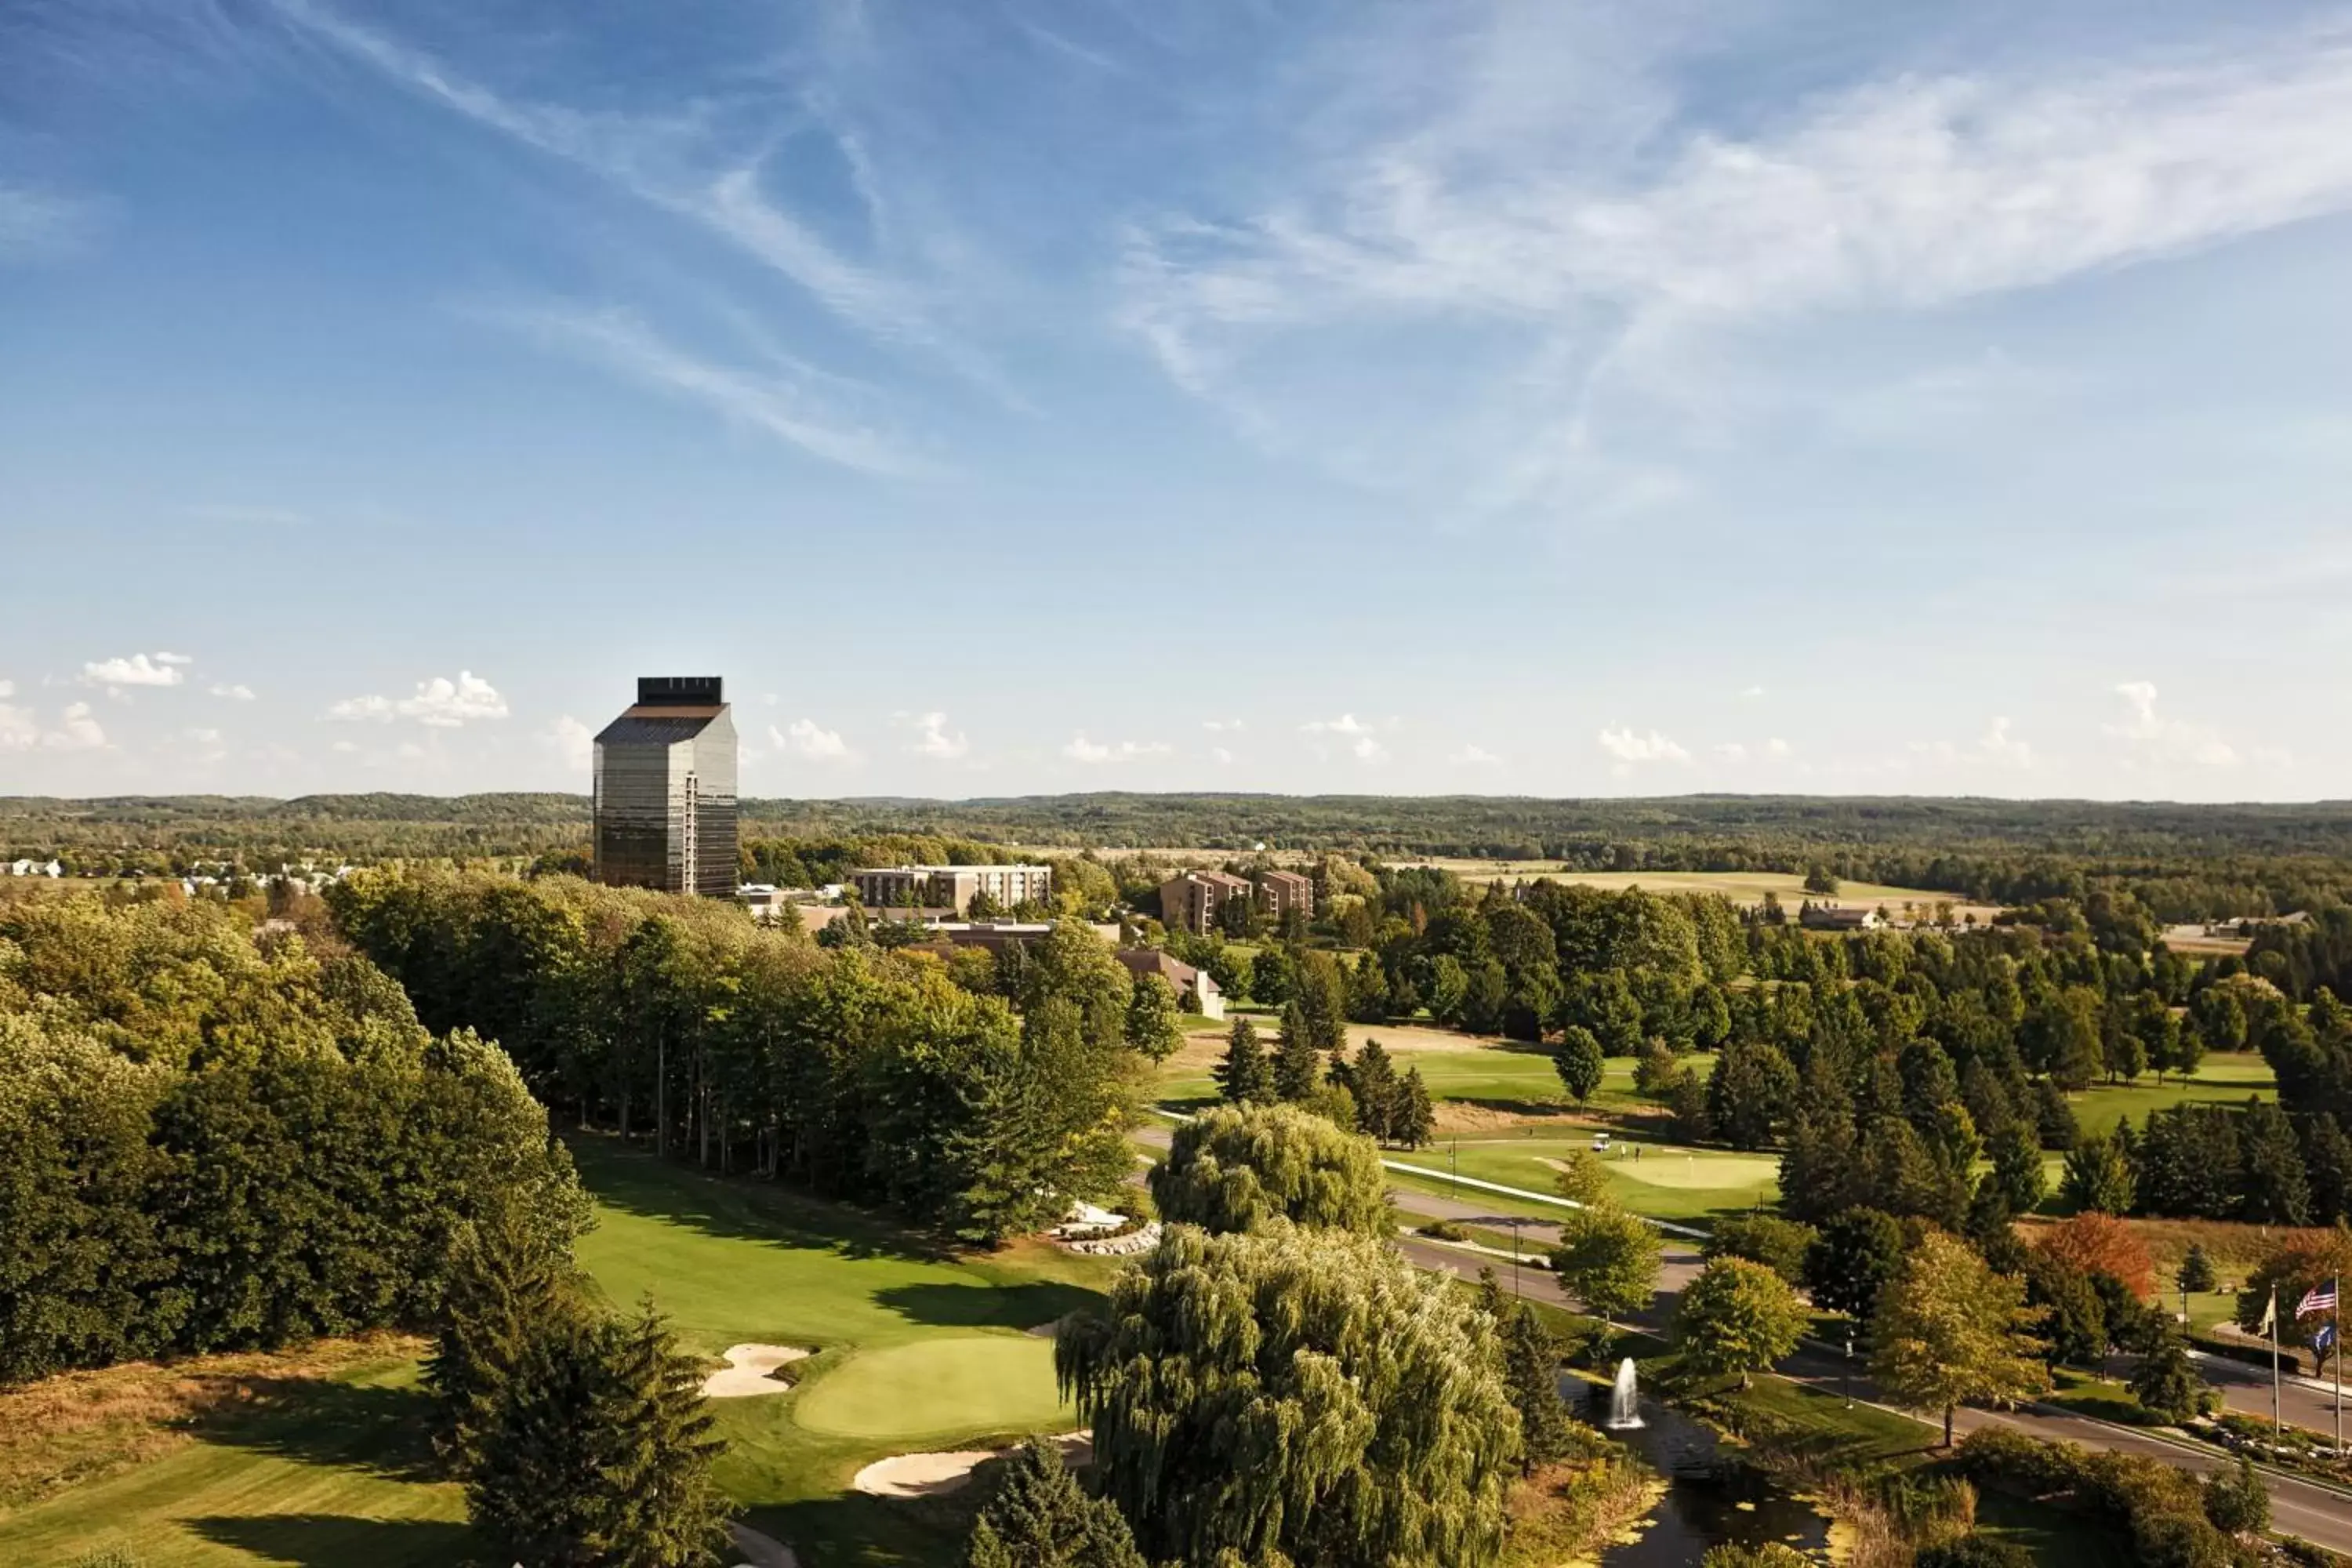 Bird's eye view in Grand Traverse Resort and Spa